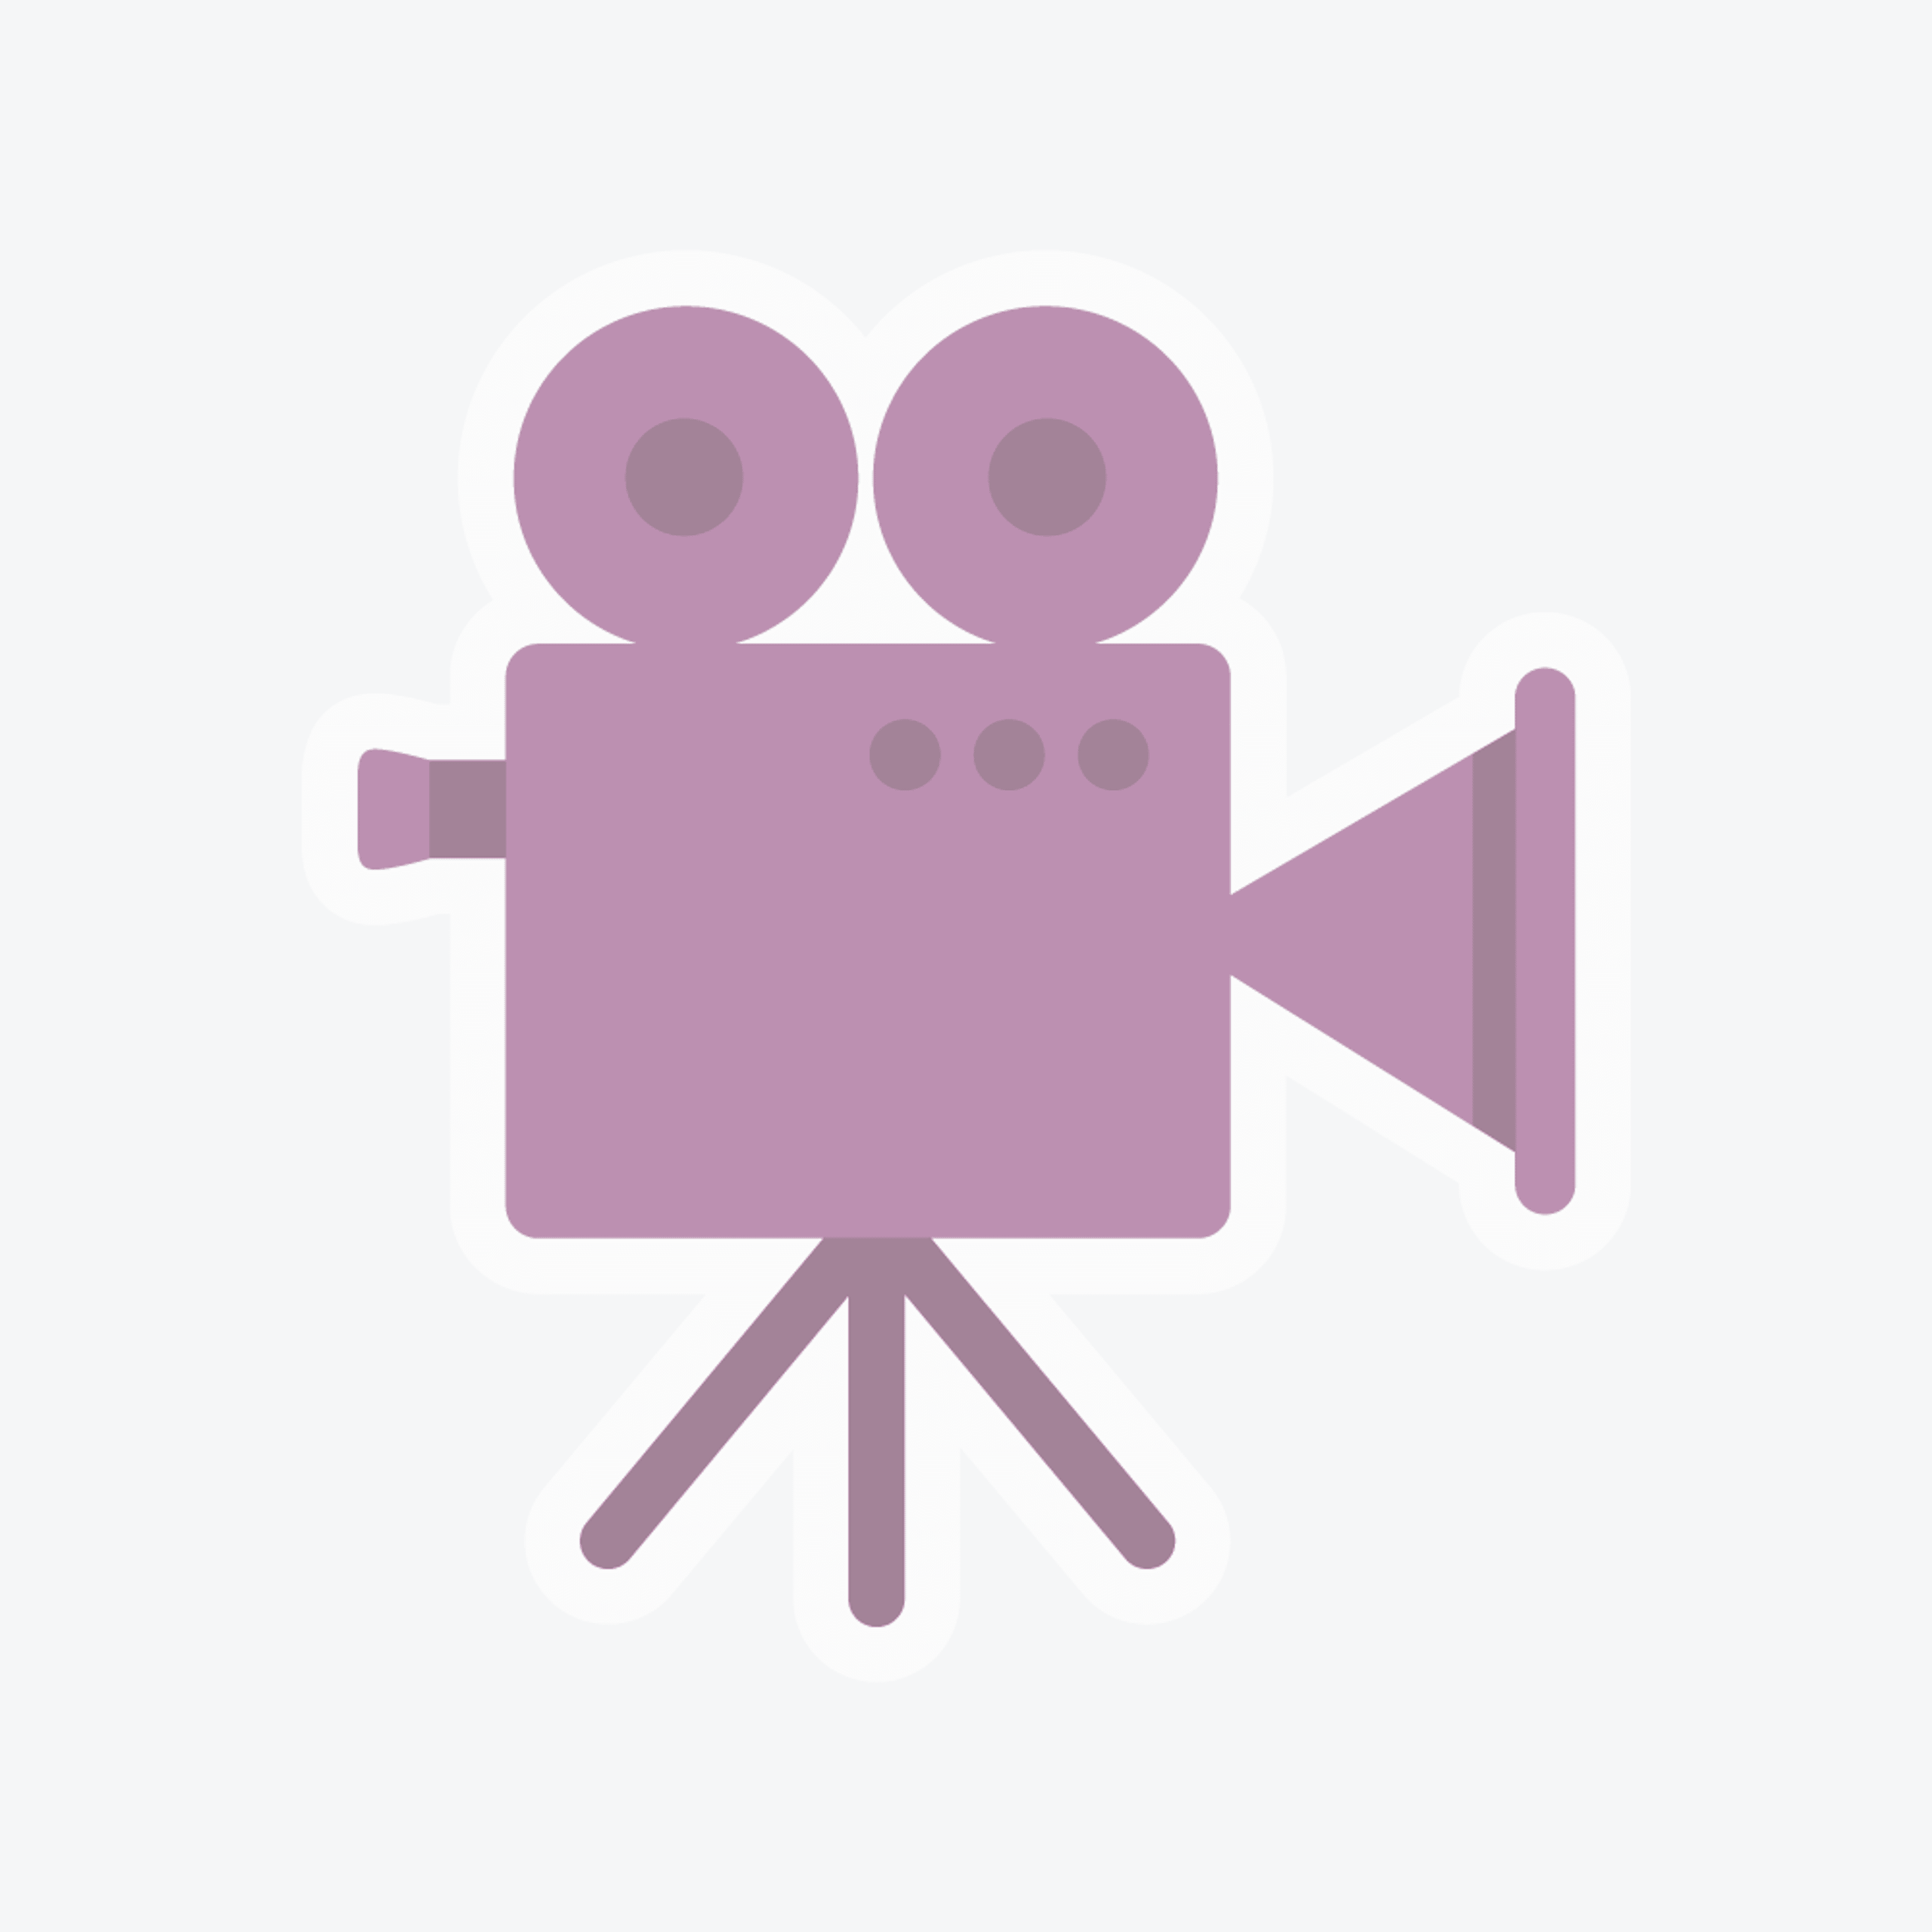 Graphic Animator / Videographer needed for small project in New Orleans